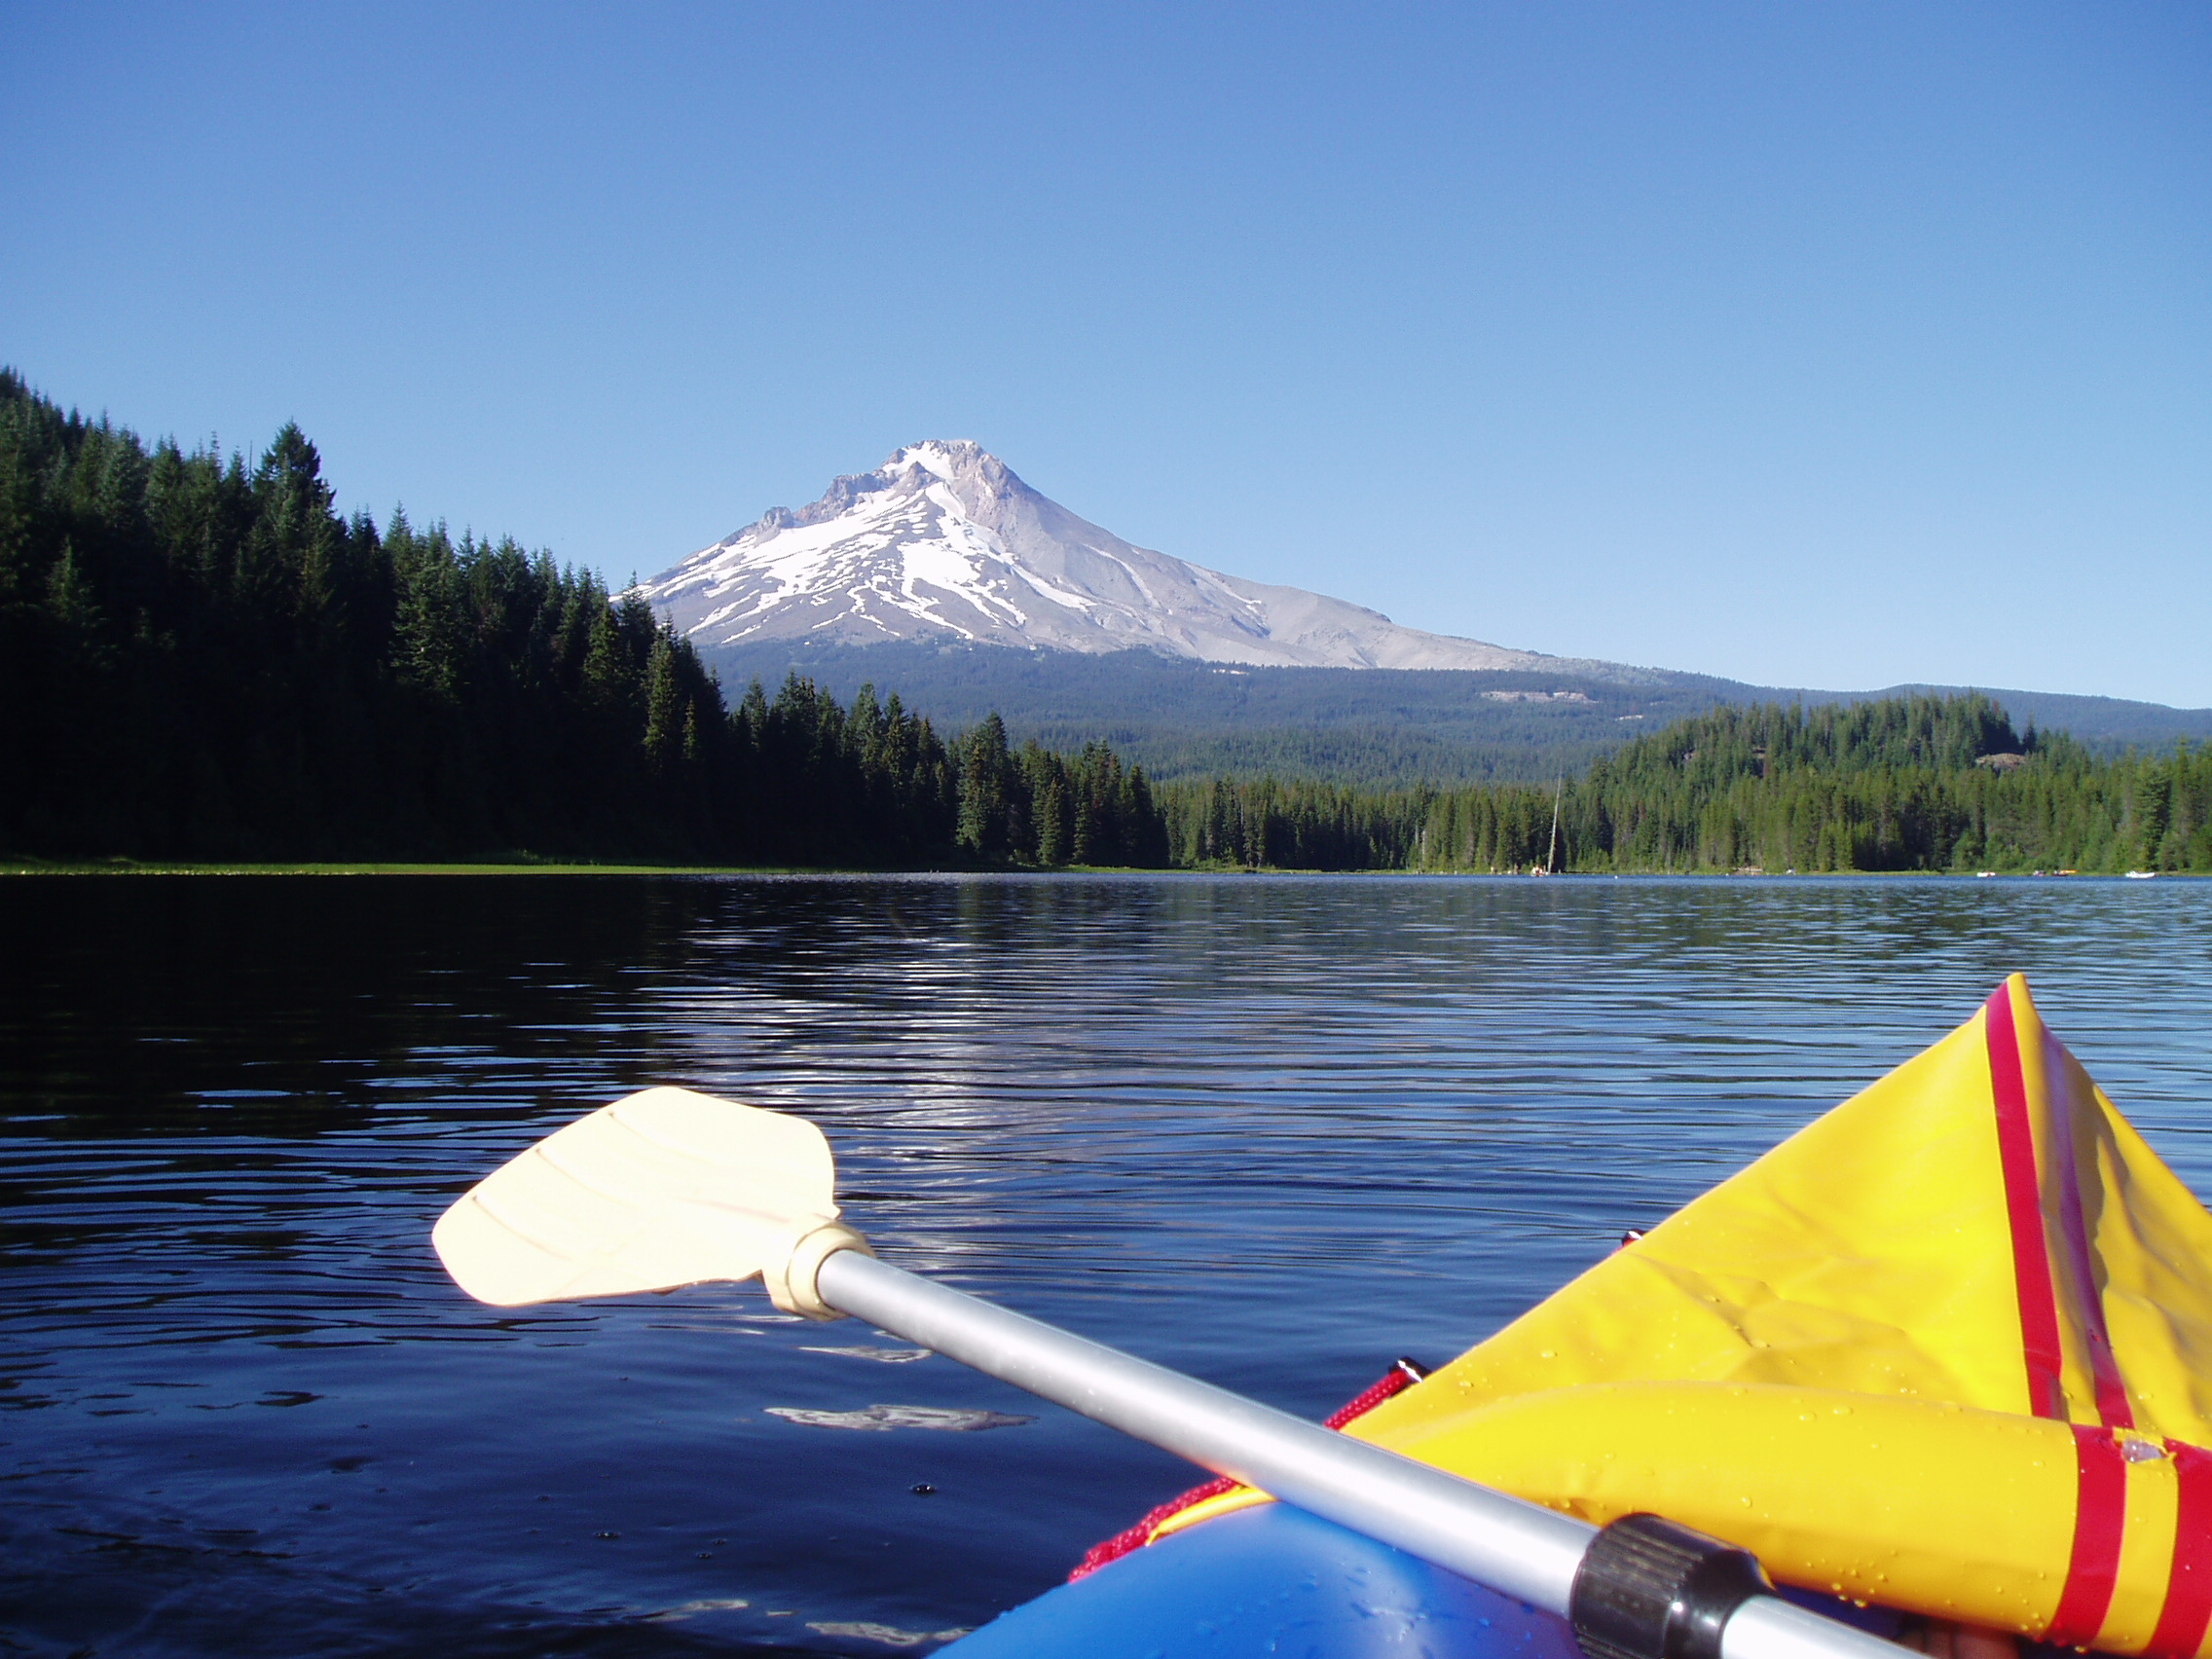 Joshann photo Looking at Mt. Hood from trillium lake in a boat